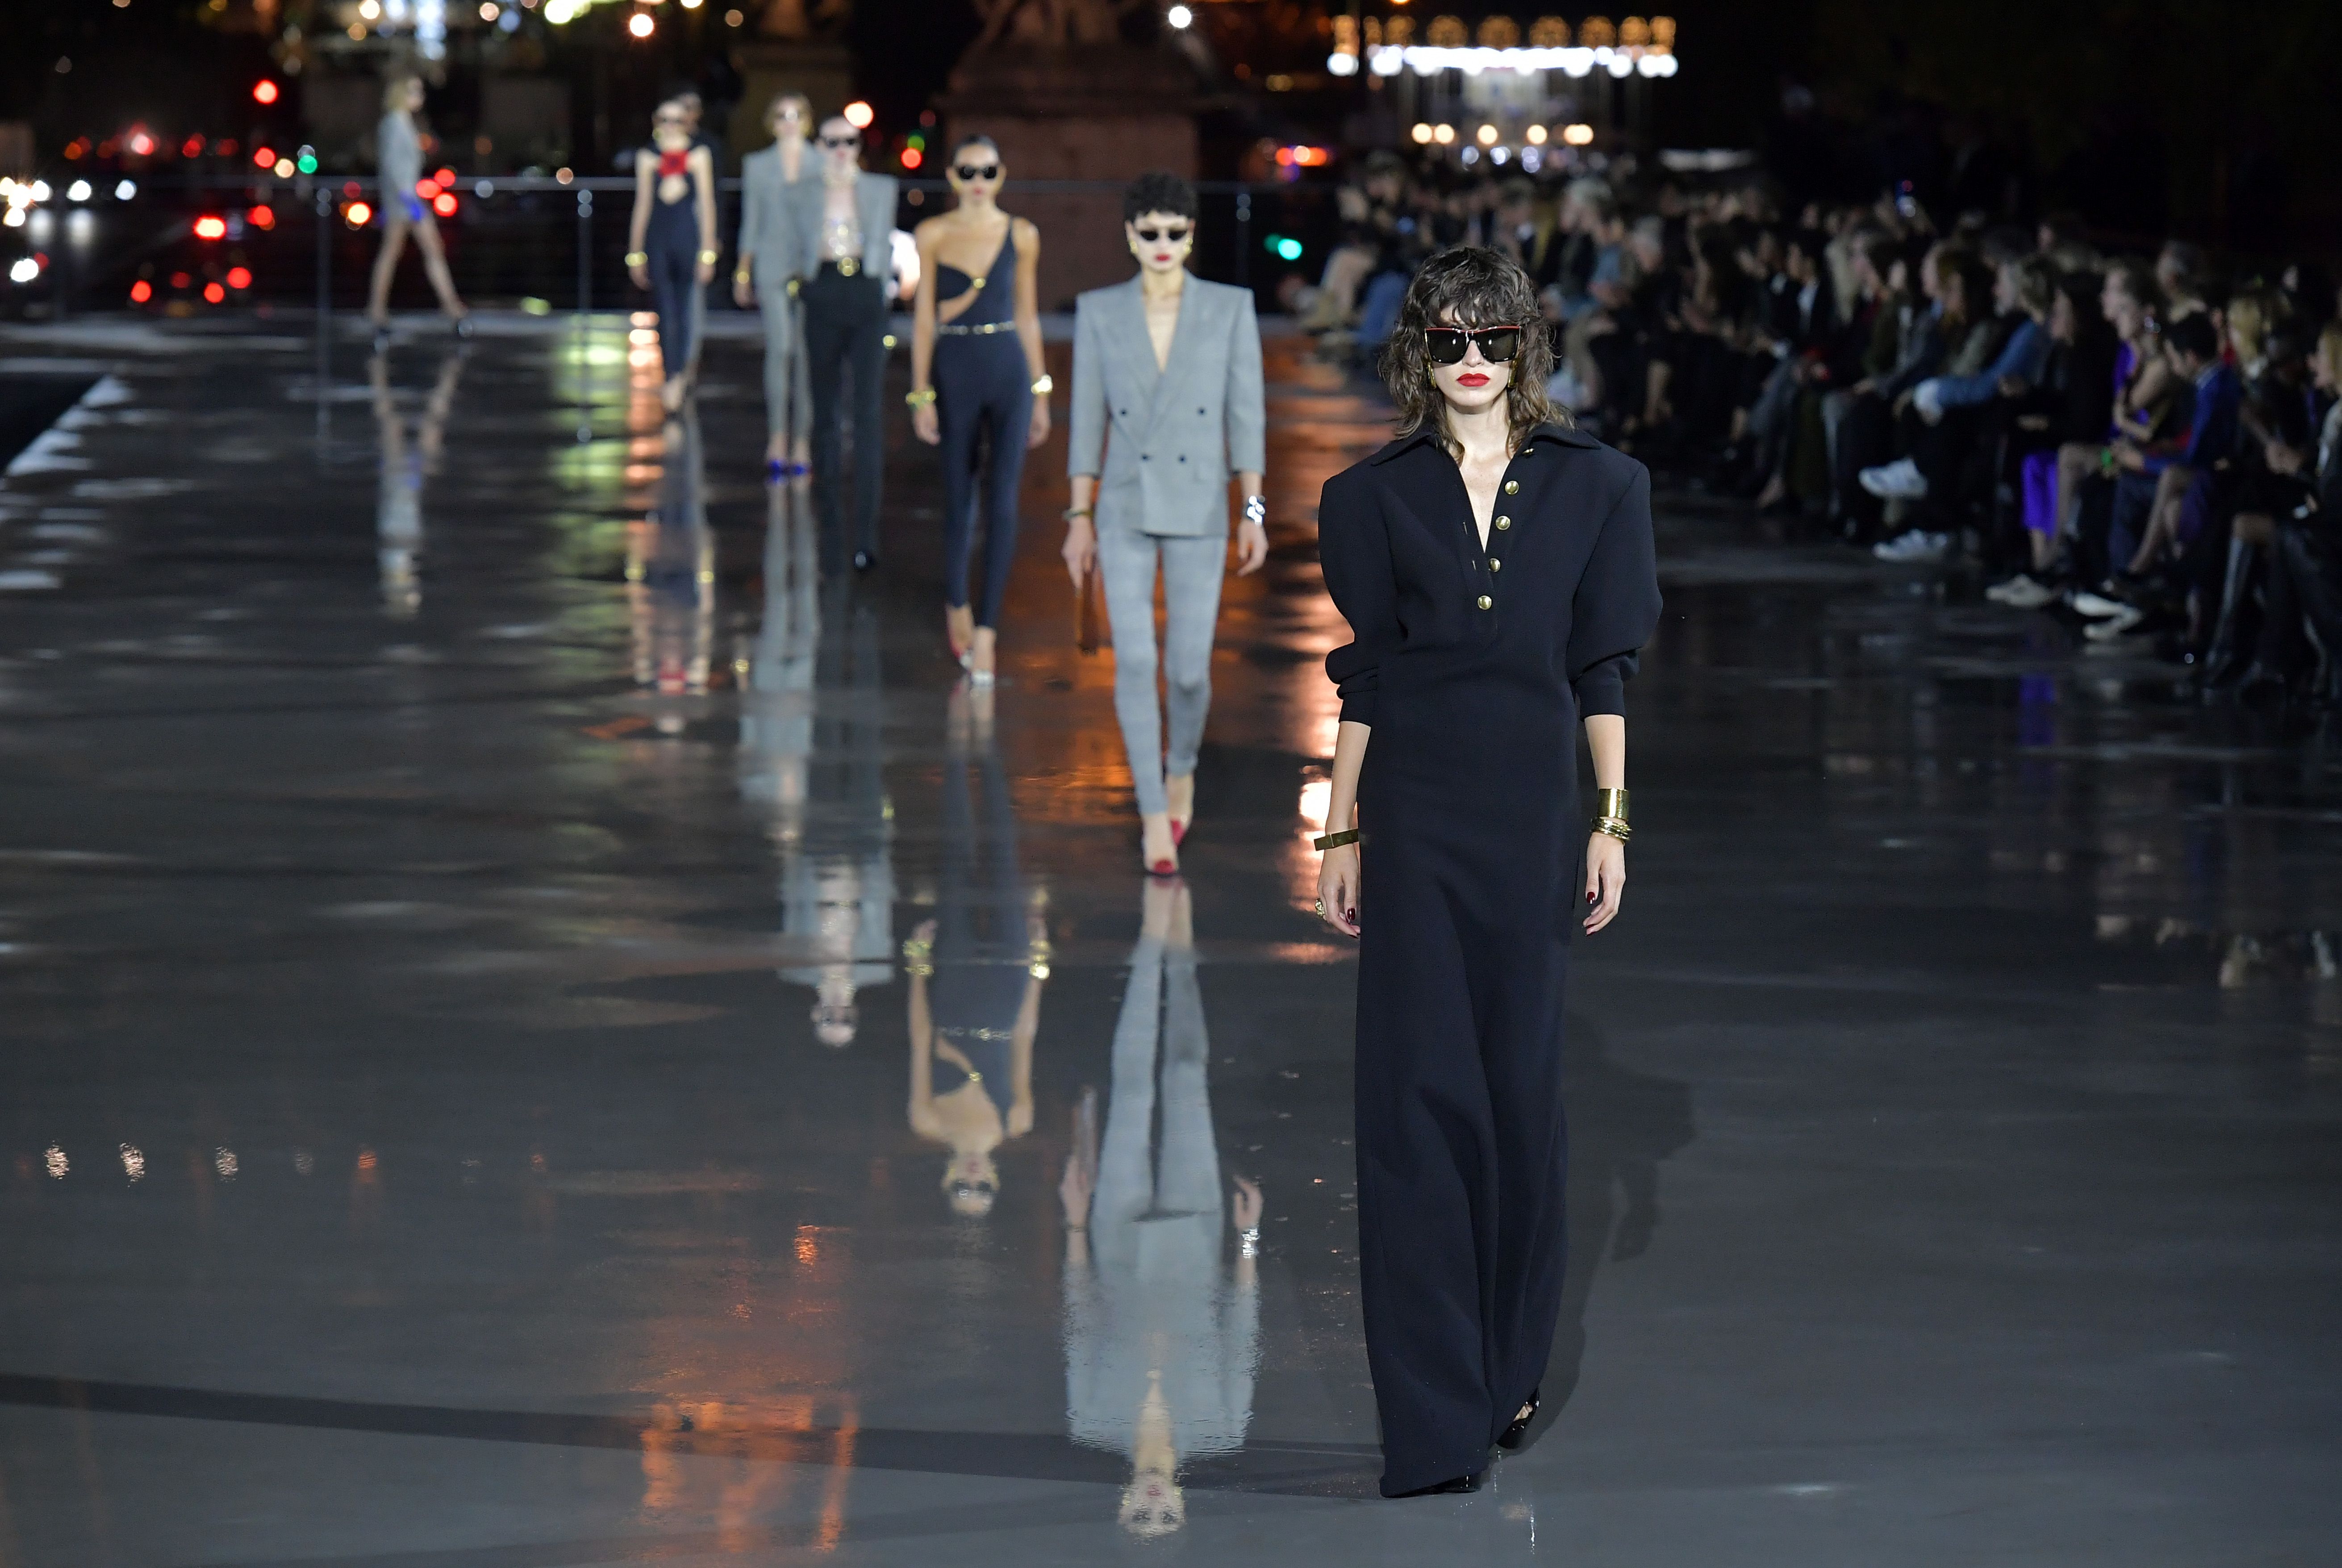 Saint Laurent in Los Angeles: Our 5 takeaways from the Spring